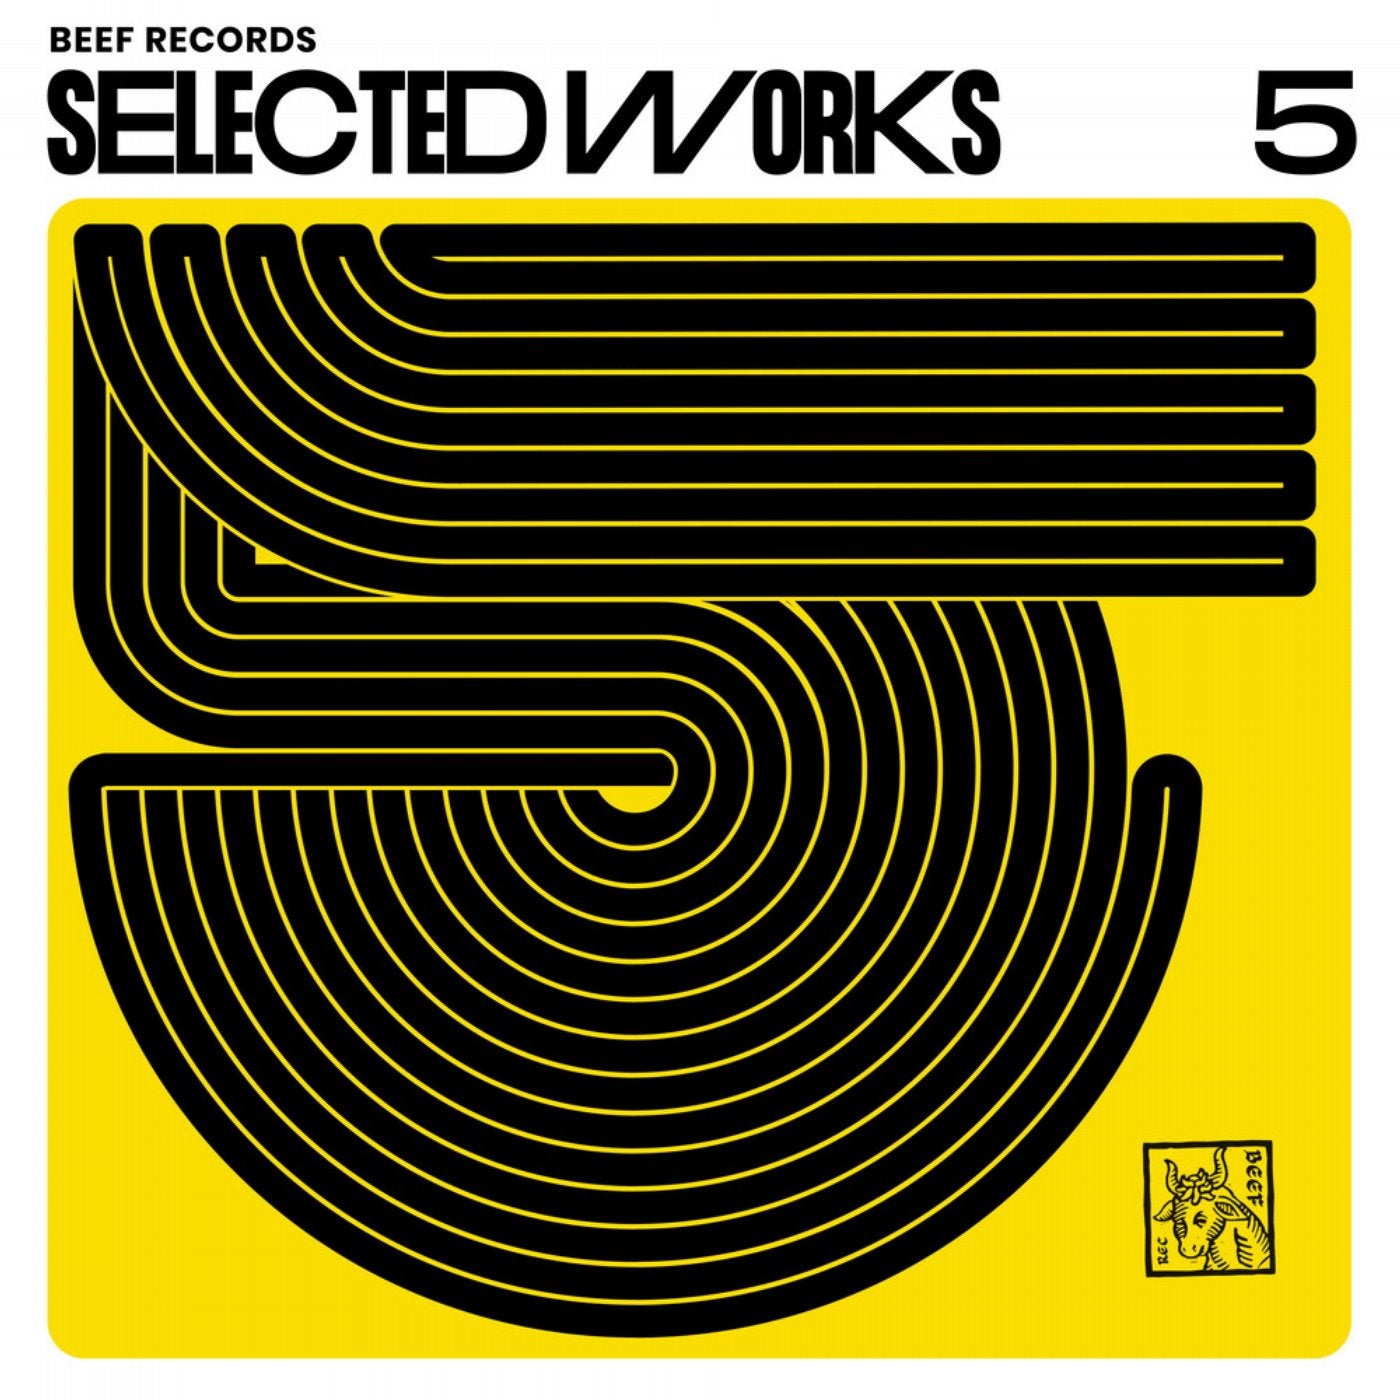 Selected Works #5